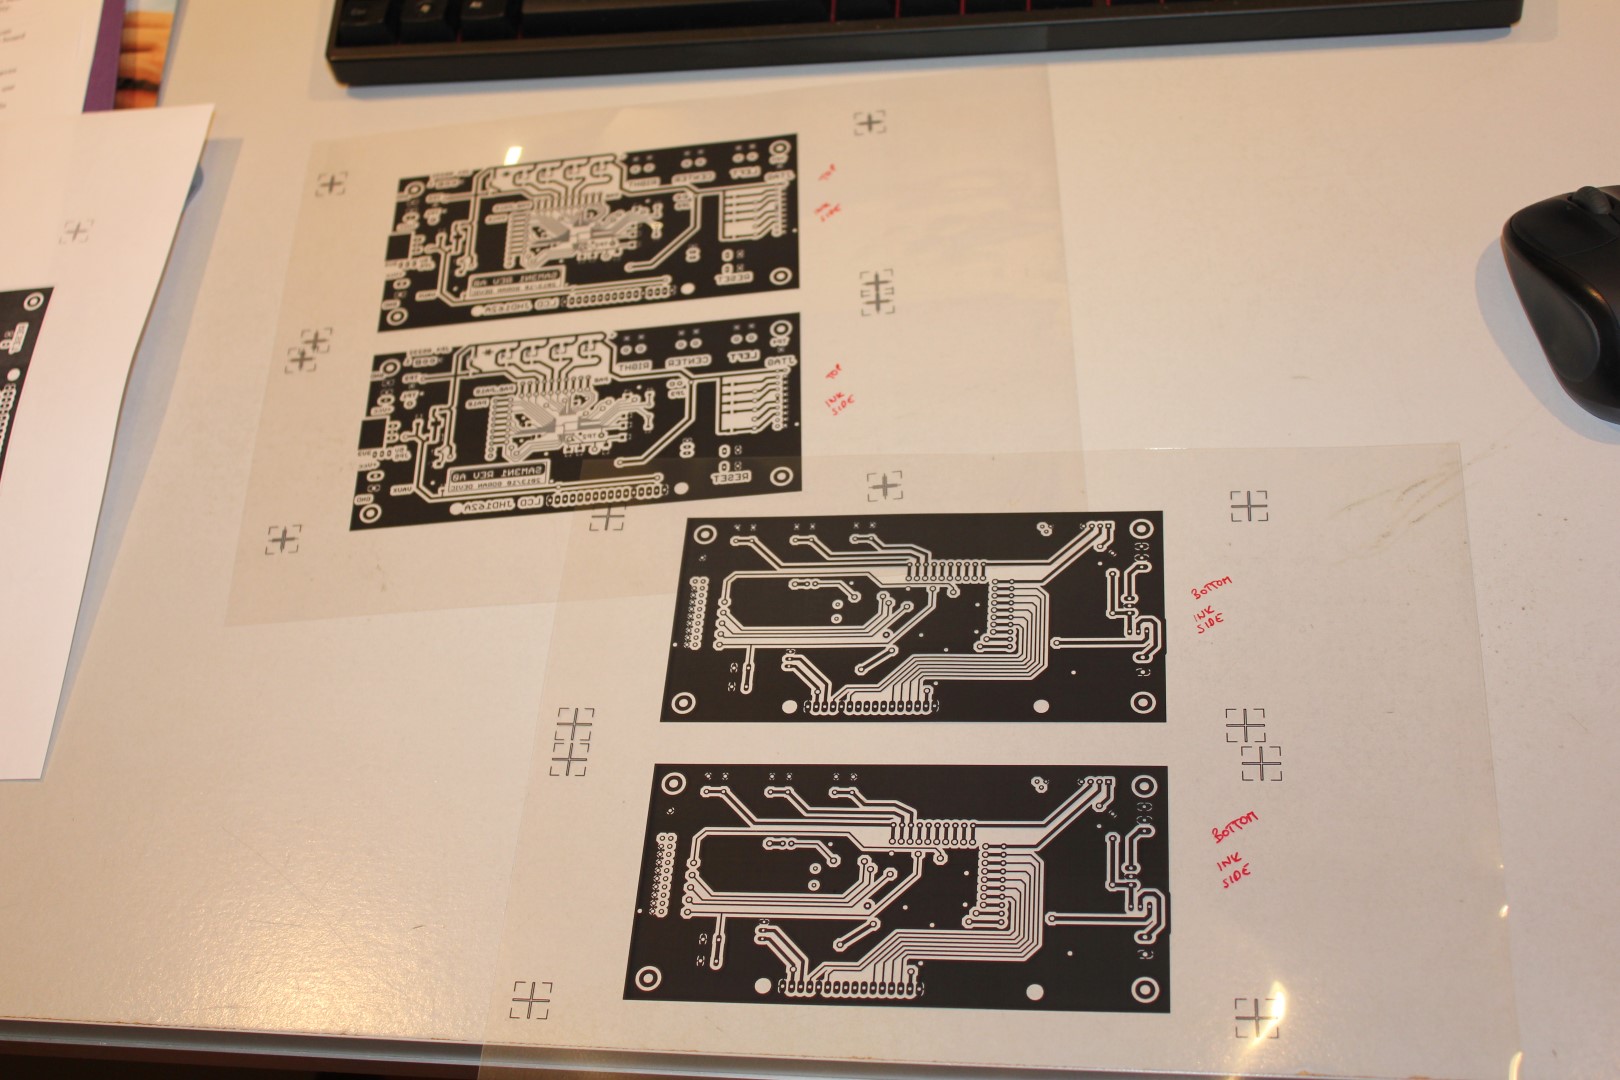 Print two sets of mask (top and bottom)